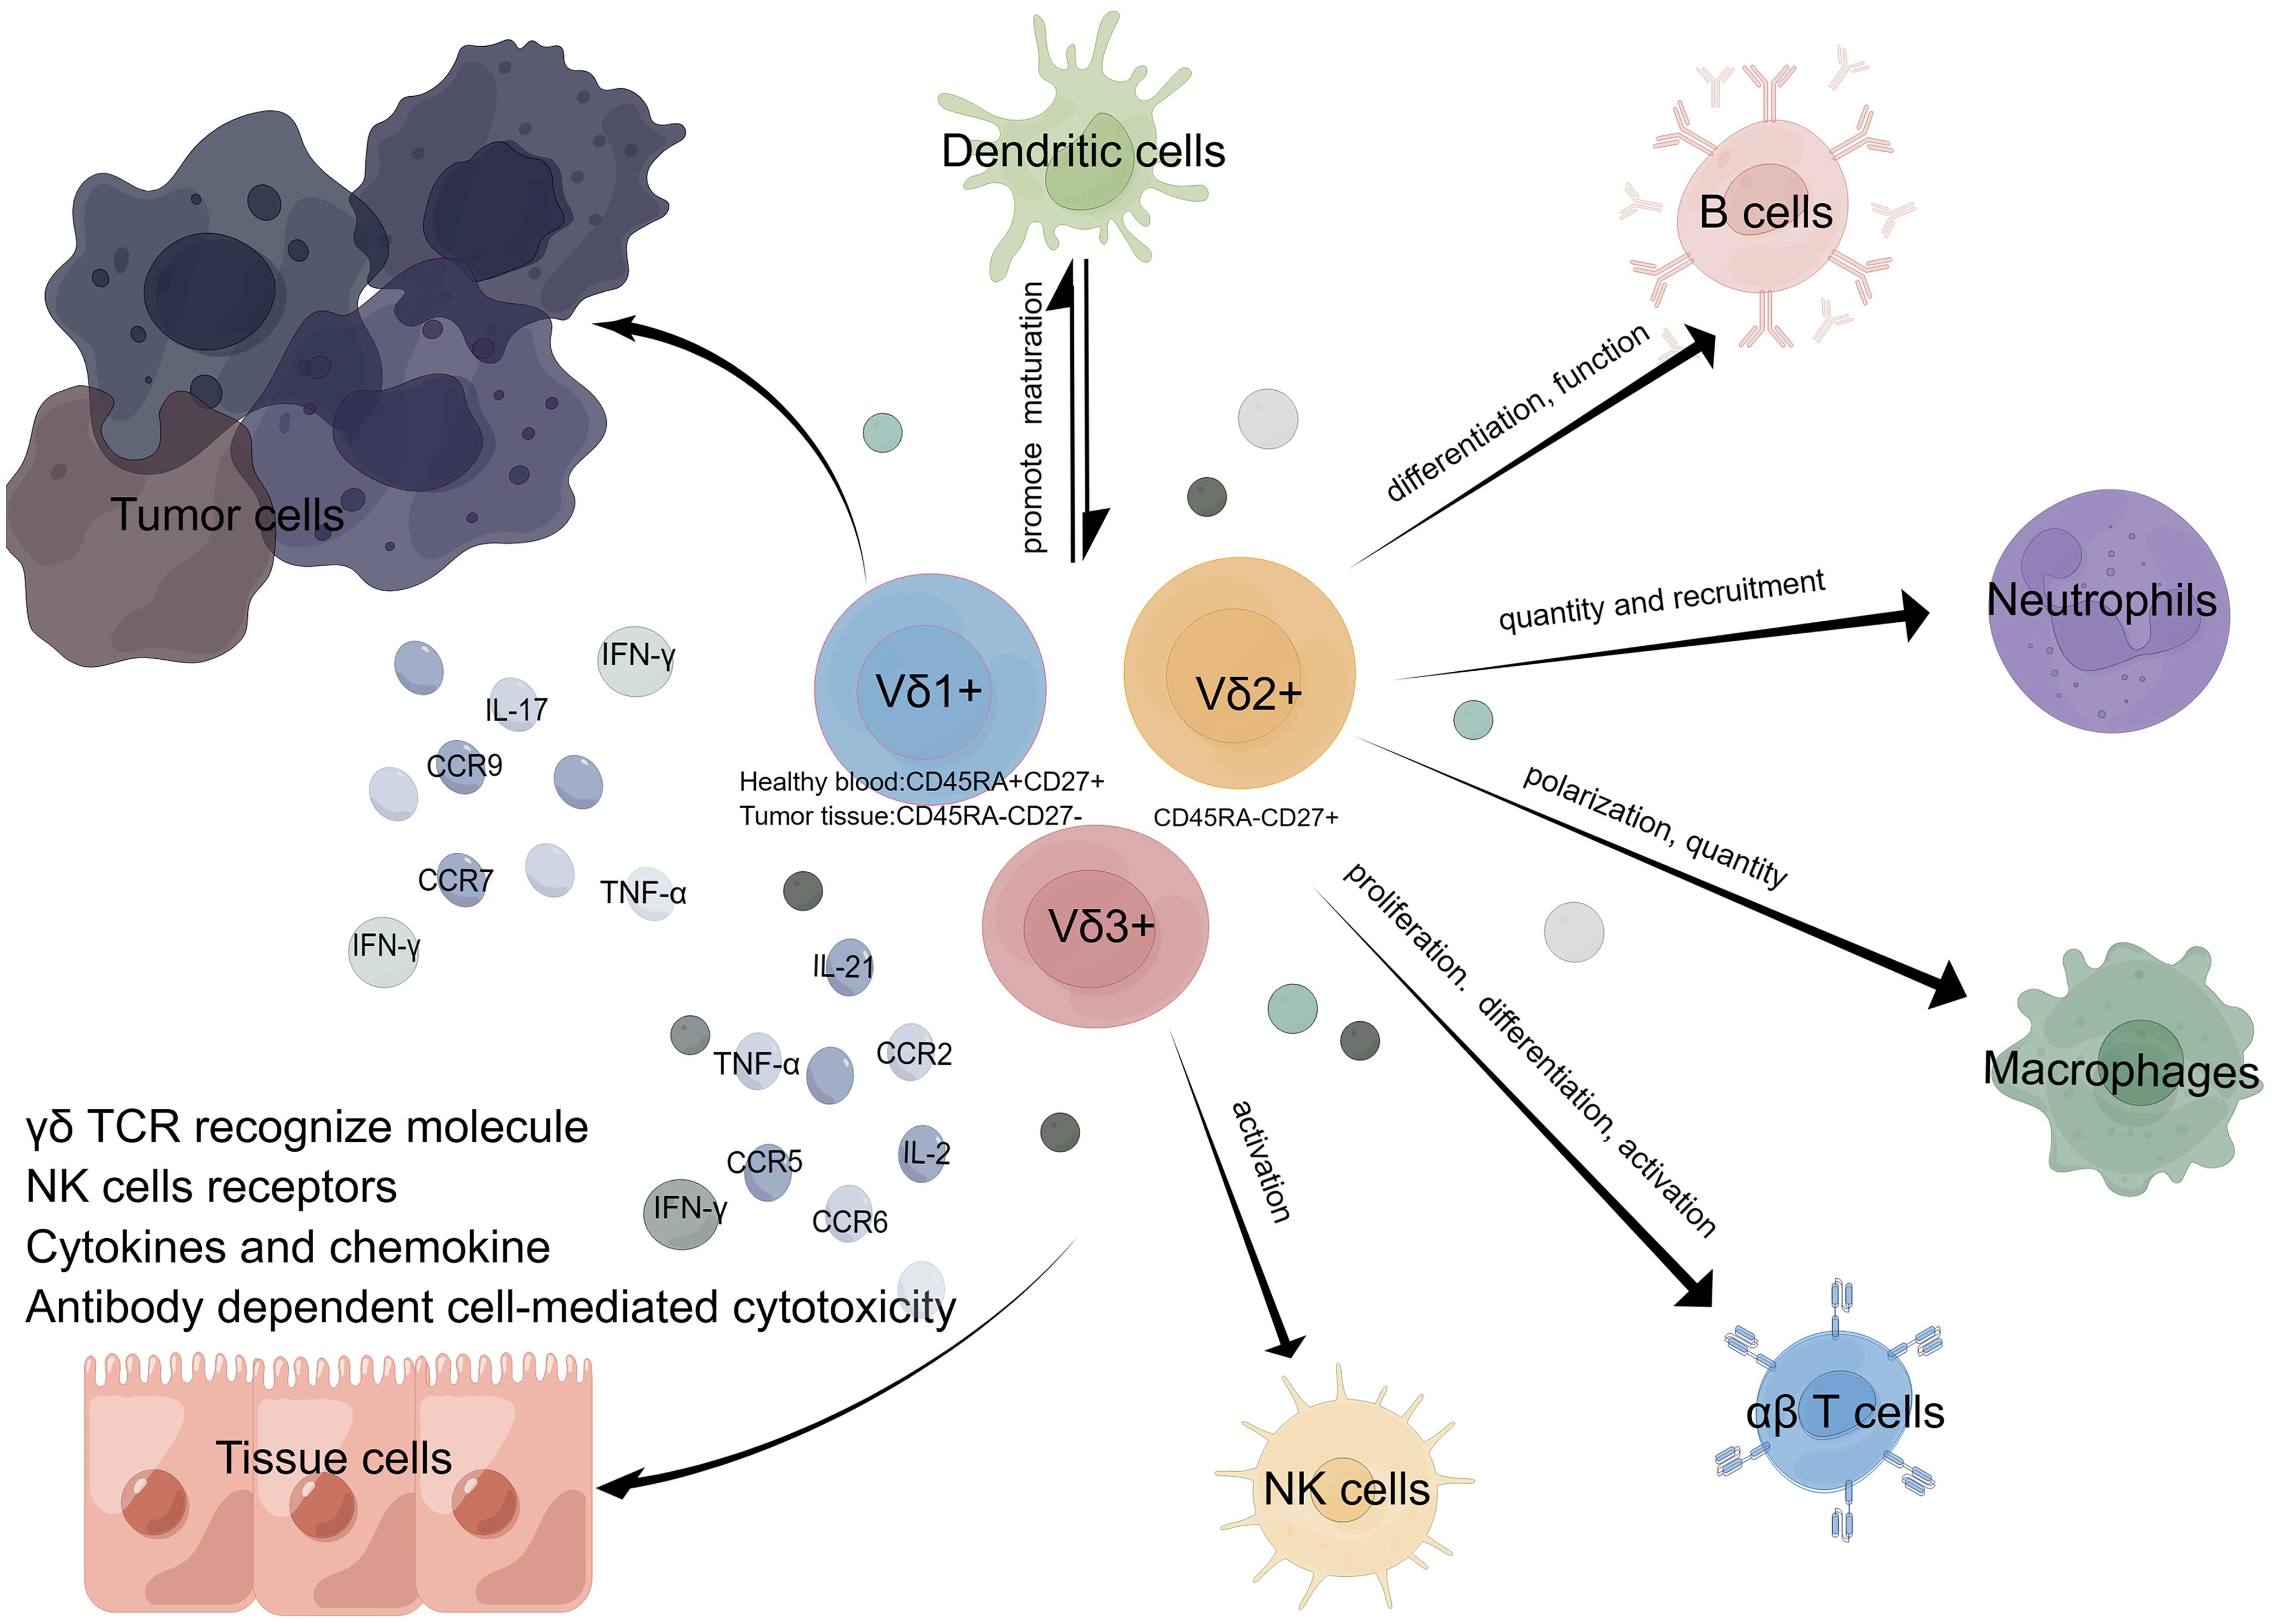 The subtypes of γδ T cells and the pathophysiological roles of γδ T cells in tumors.